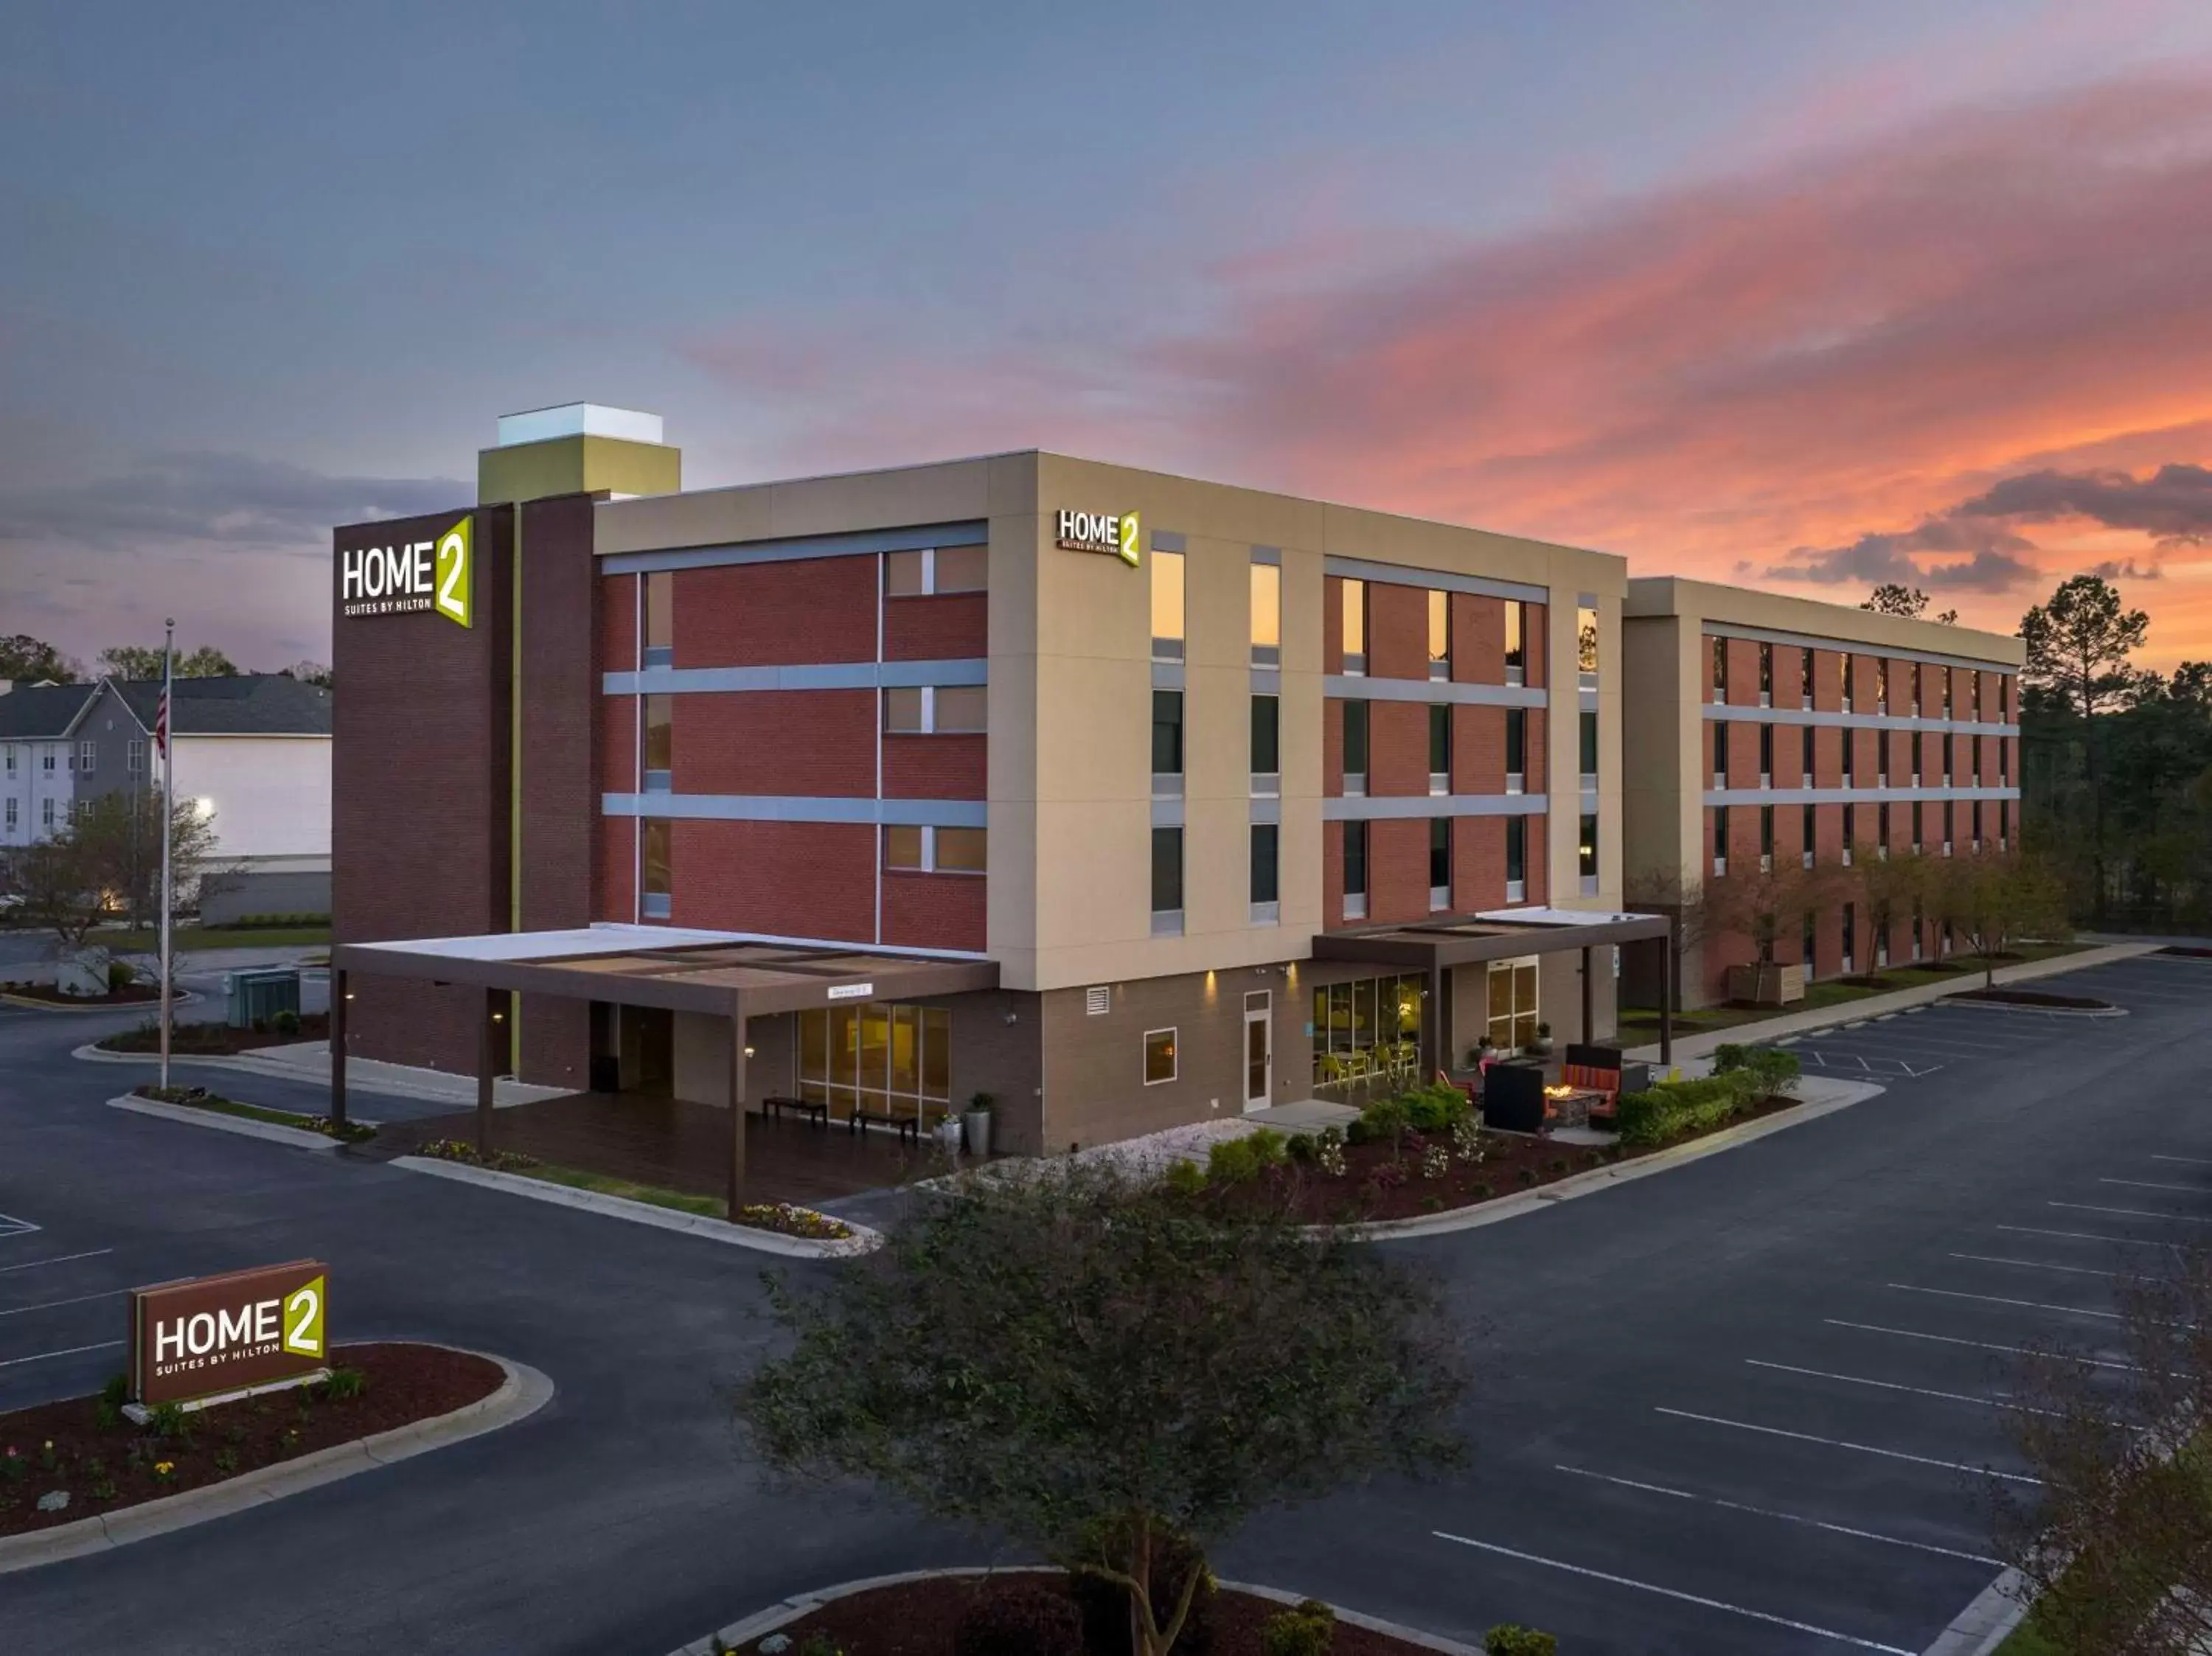 Property Building in Home2 Suites by Hilton Jacksonville, NC